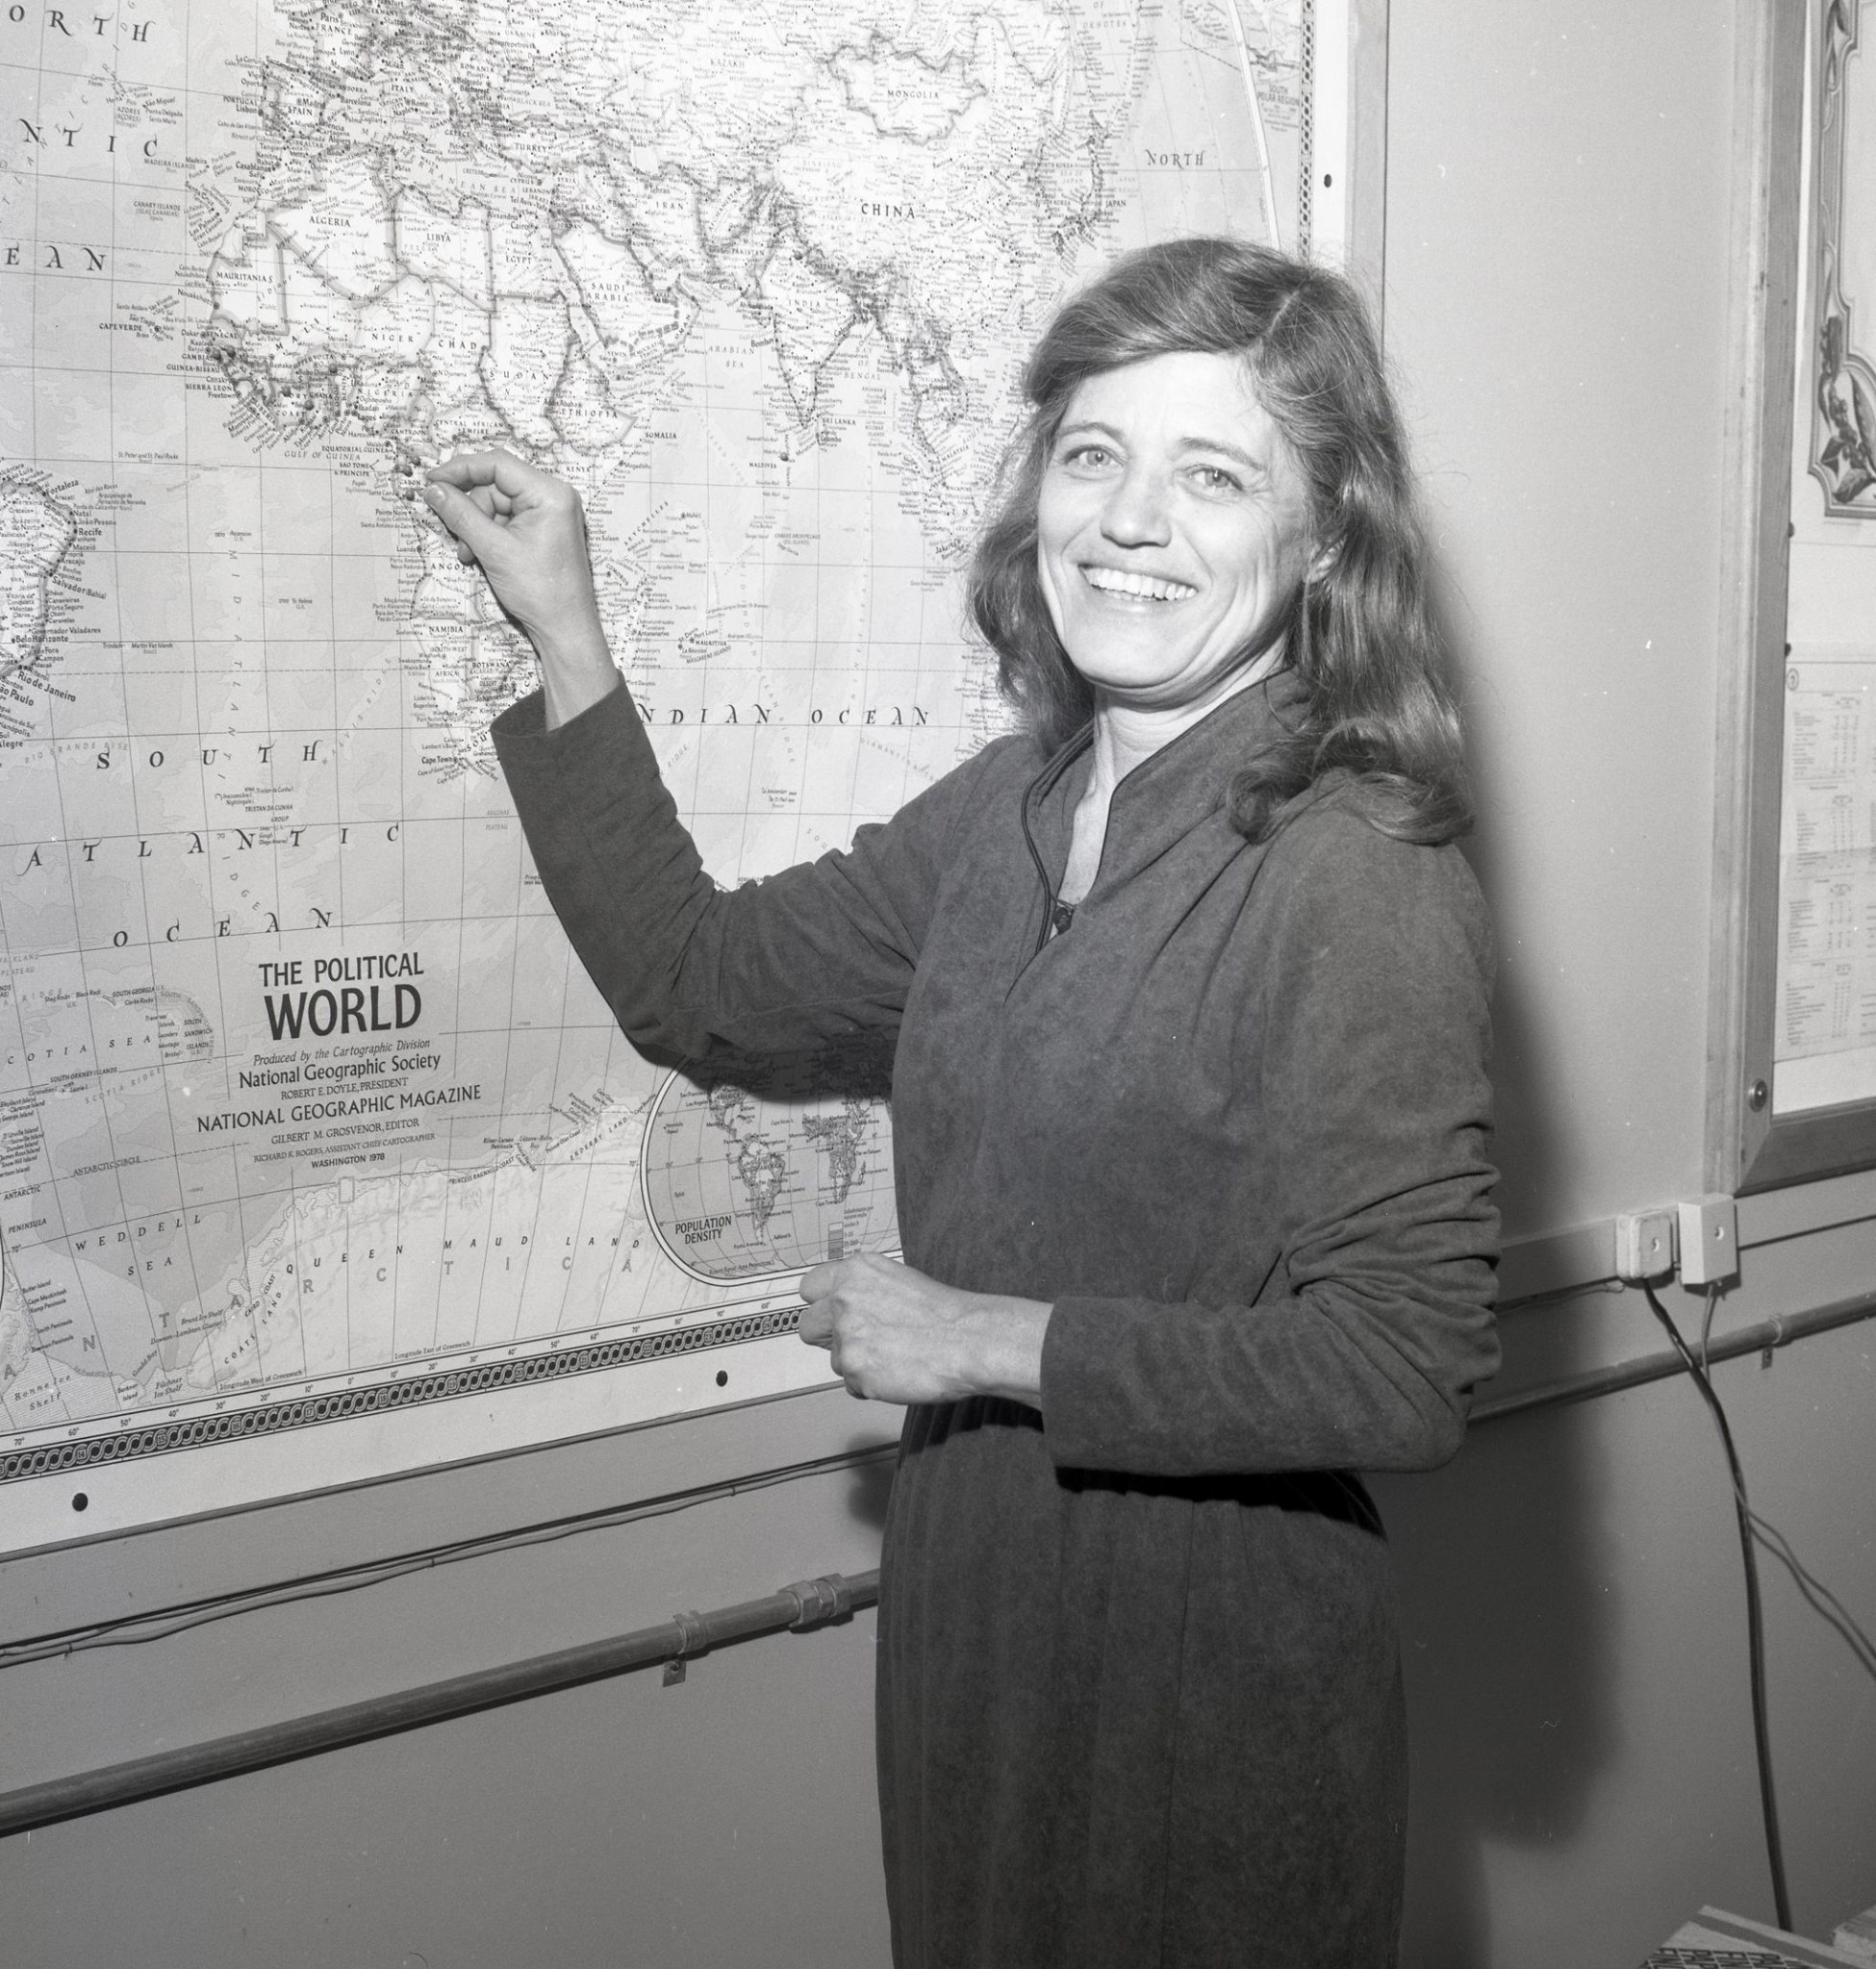 Woman pointing at map.